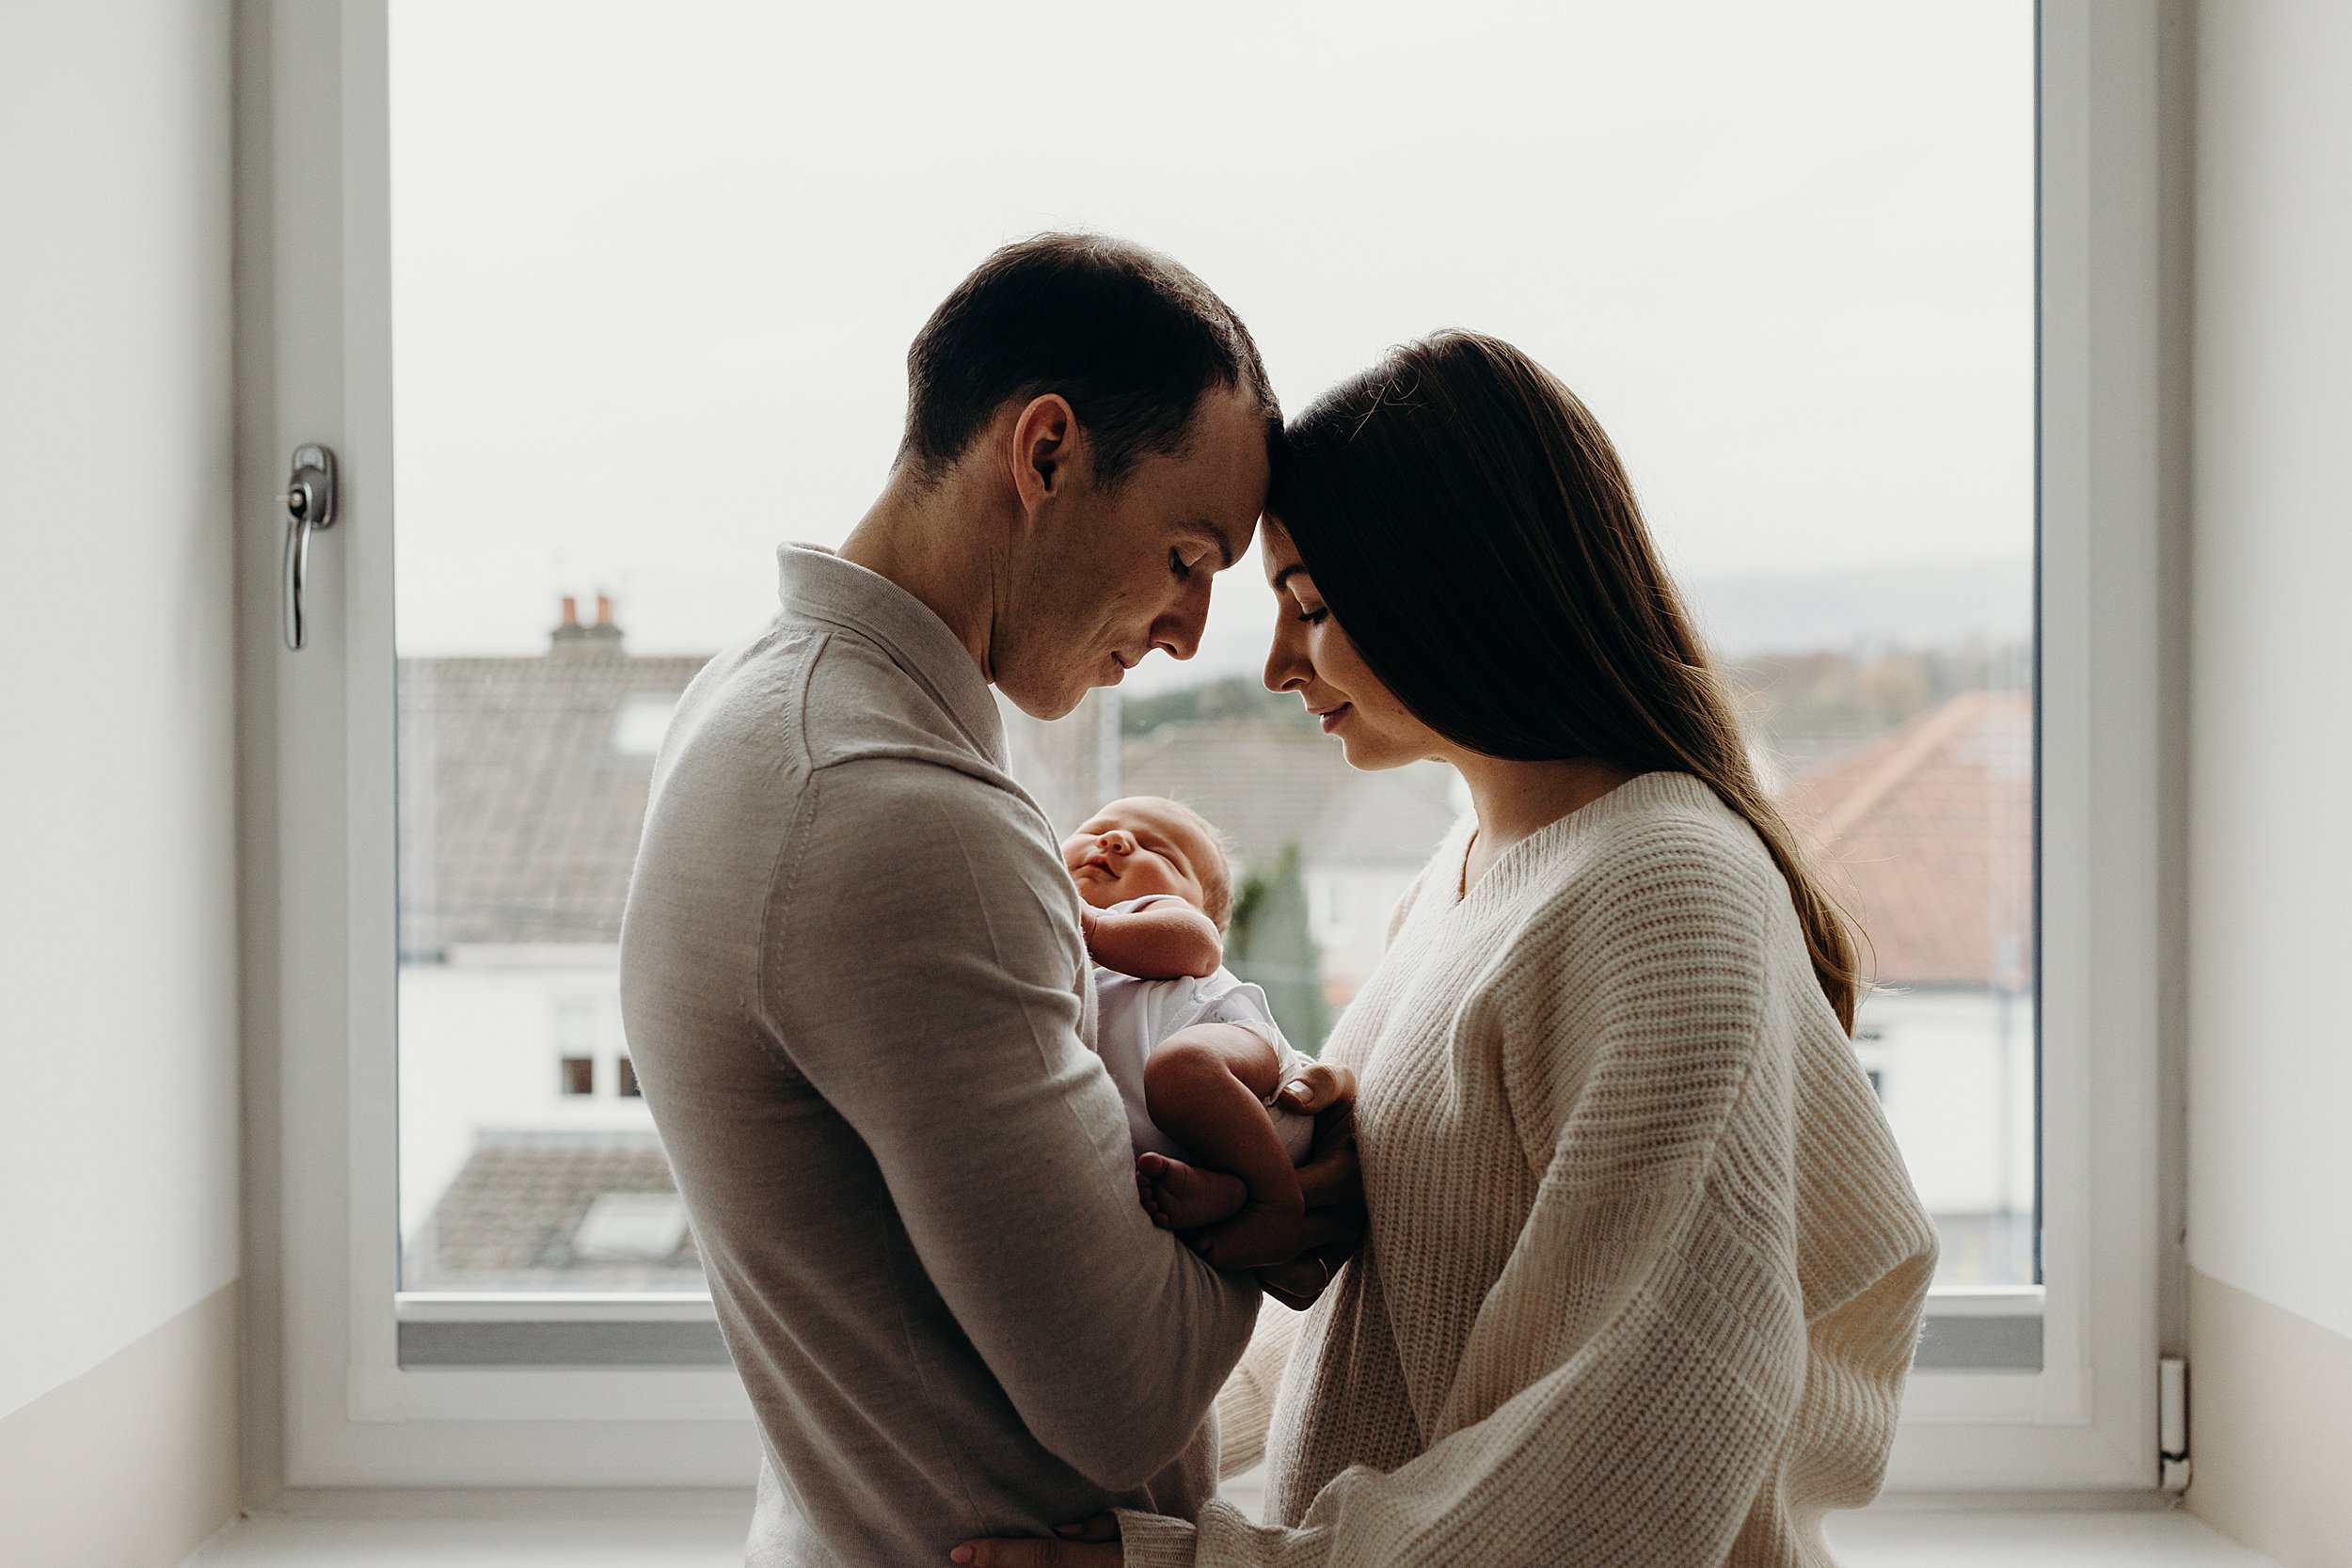 family photographer glasgow captures father holding baby he is forehead to forehead with mother in front of a window with houses visible outside